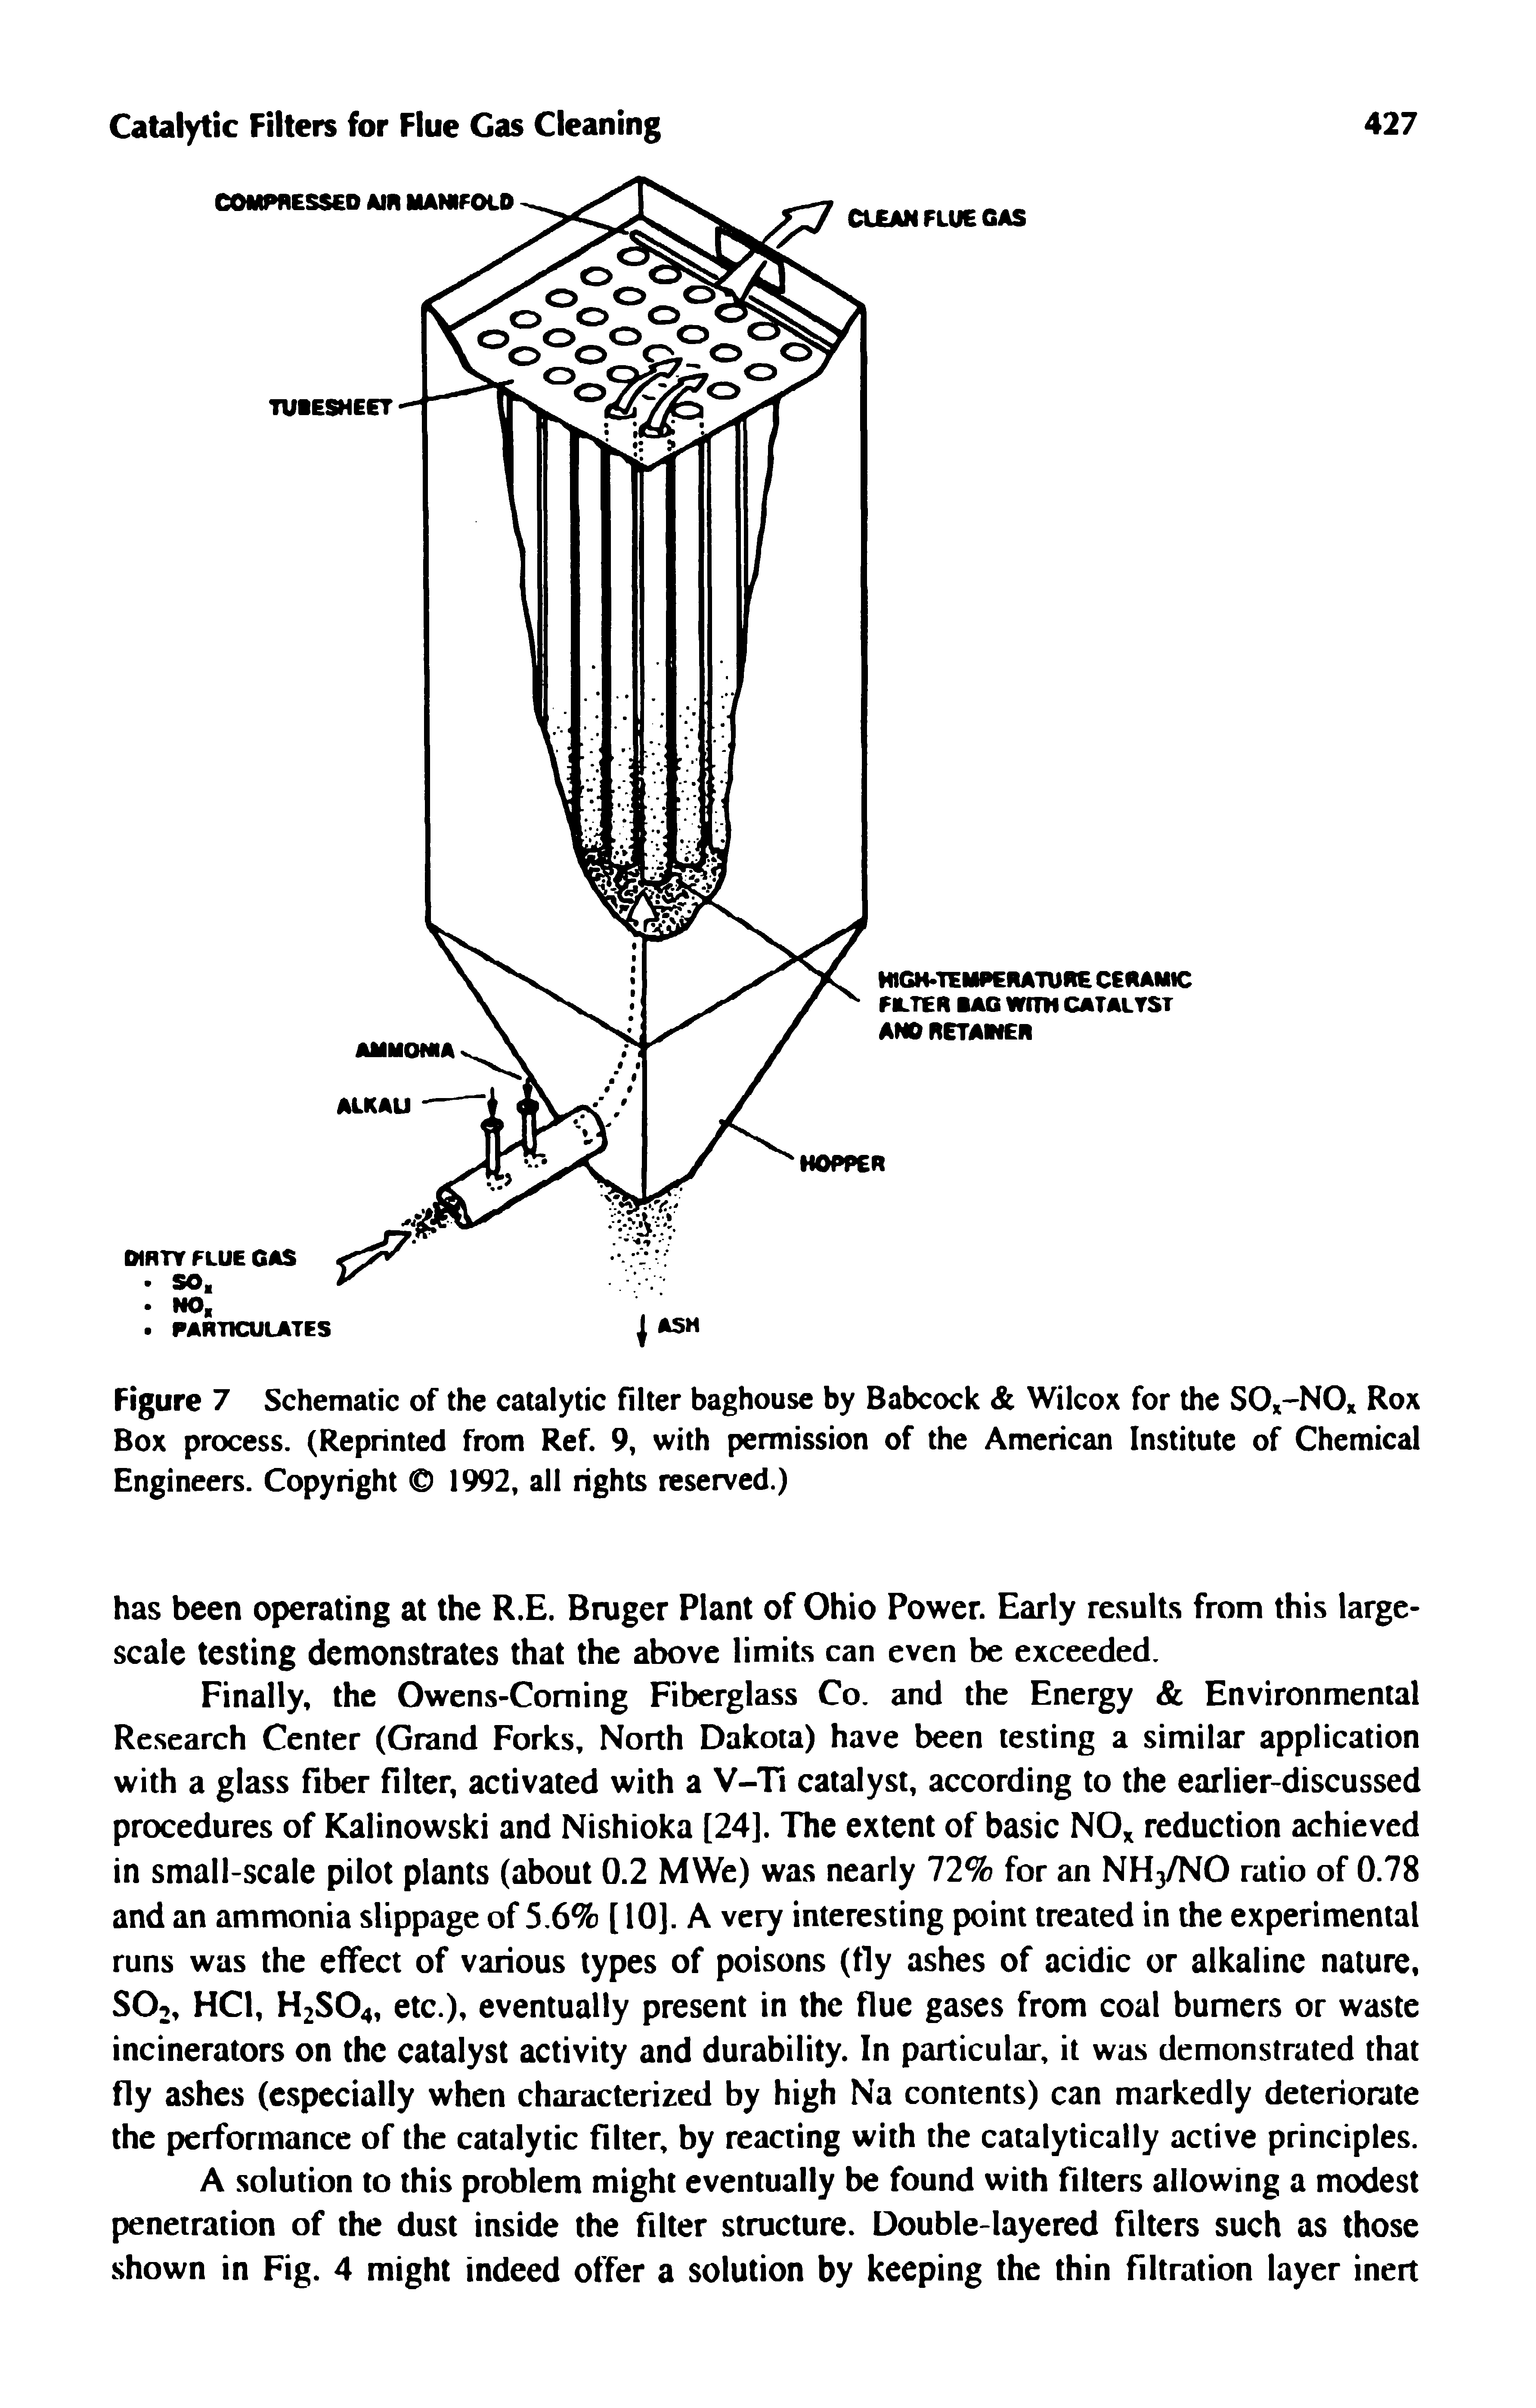 Figure 7 Schematic of the catalytic filter baghouse by Babcock Wilcox for the SO.-NO. Rox Box process. (Reprinted from Ref. 9, with permission of the American Institute of Chemical Engineers. Copyright 1992, all rights reserved.)...